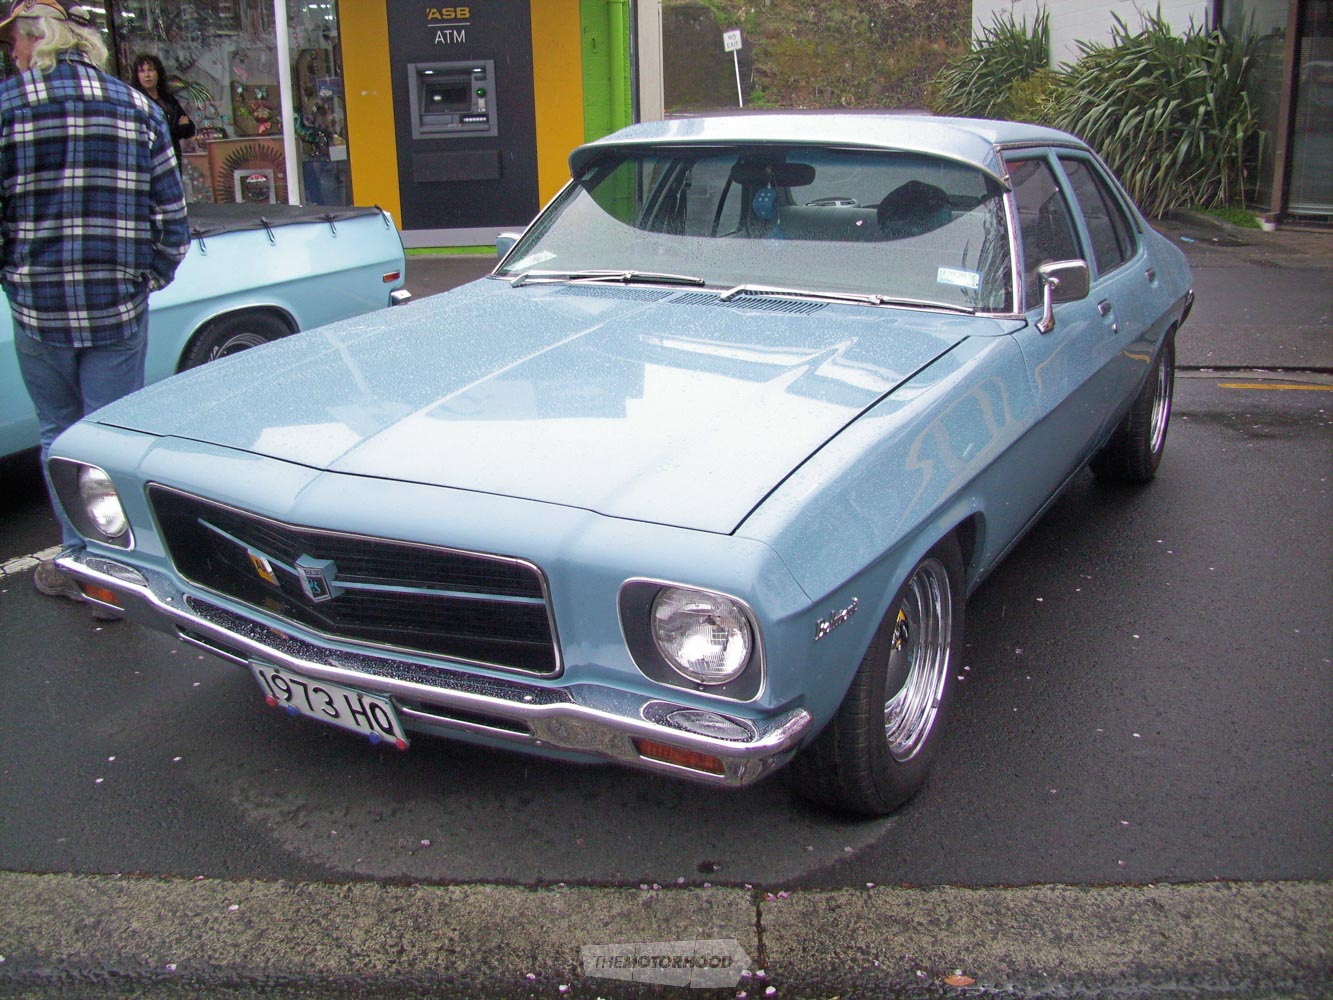 Clinton Tau owns this 1973 HQ Holden Belmonty and is also a member of the GM Enthusiast club.jpg